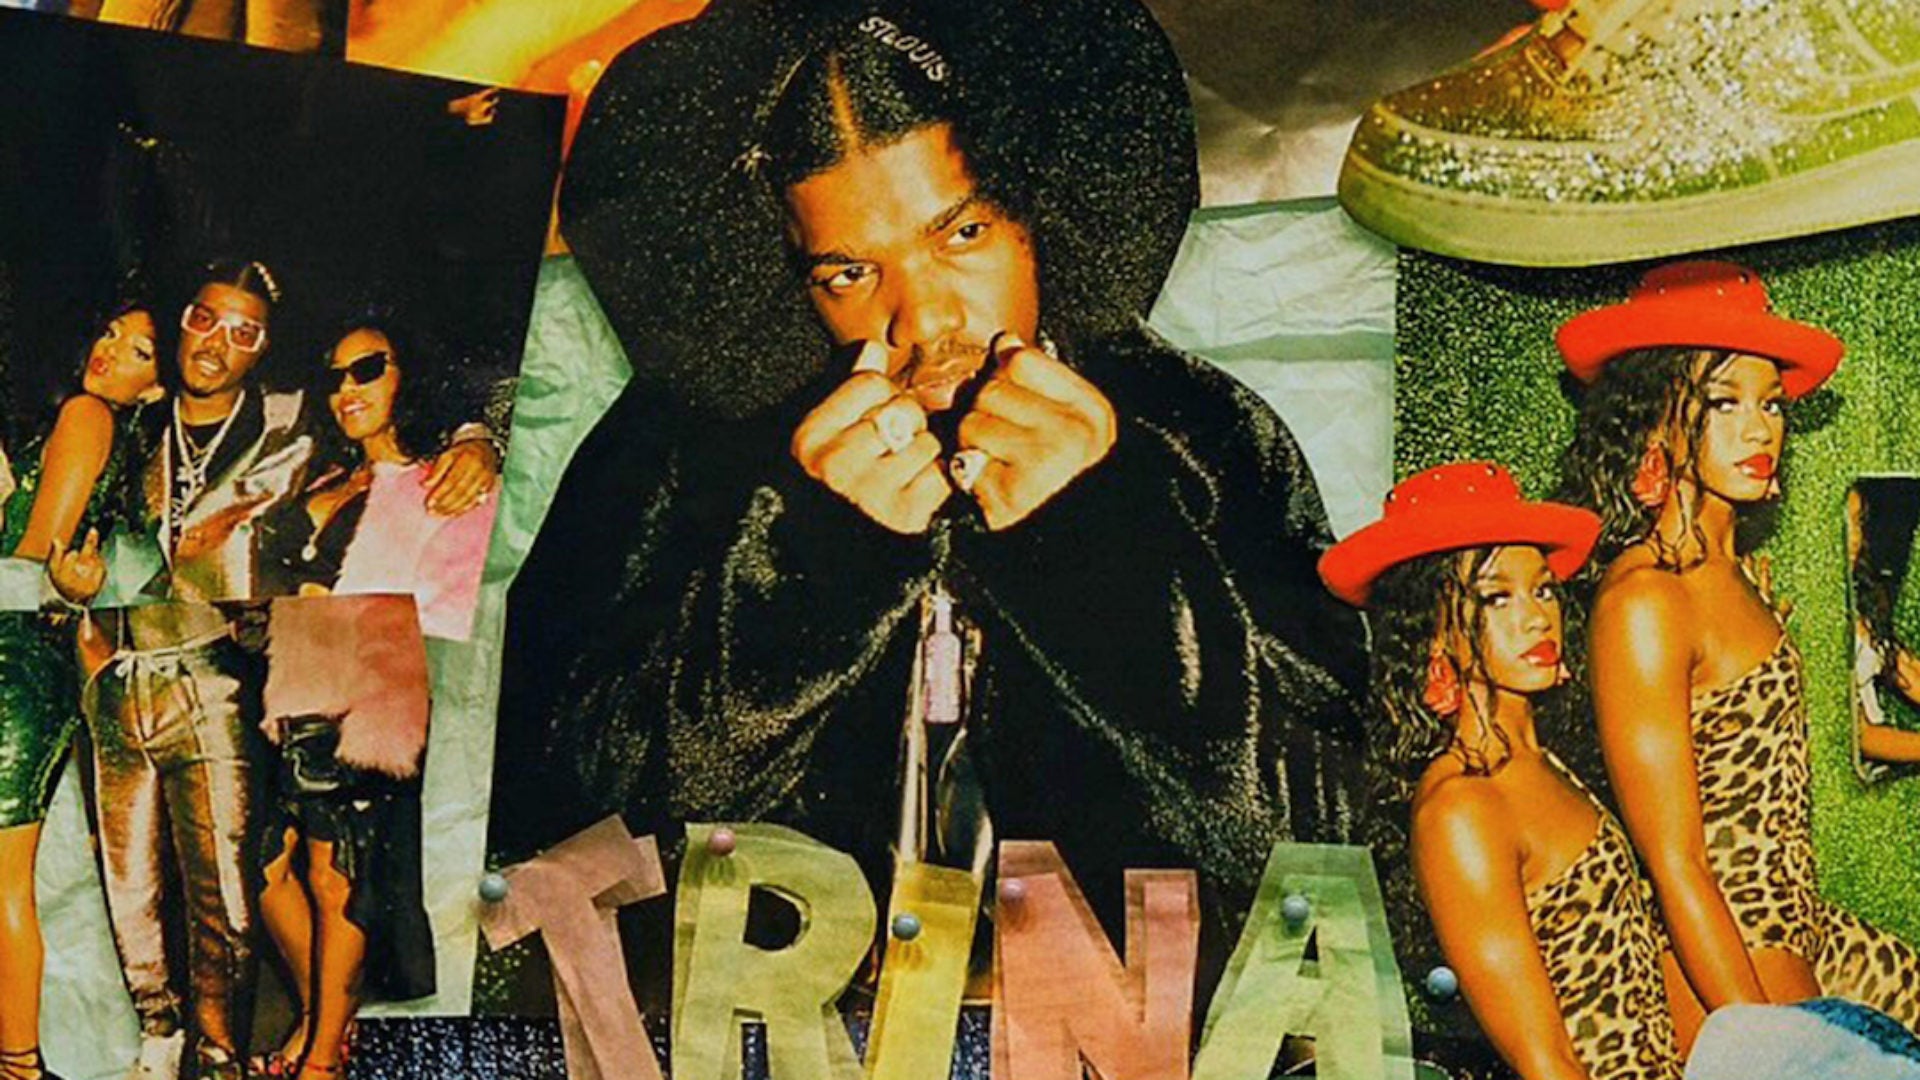 Rapper Smino Gives A Nod To One Of Music's Best With 'Trina'